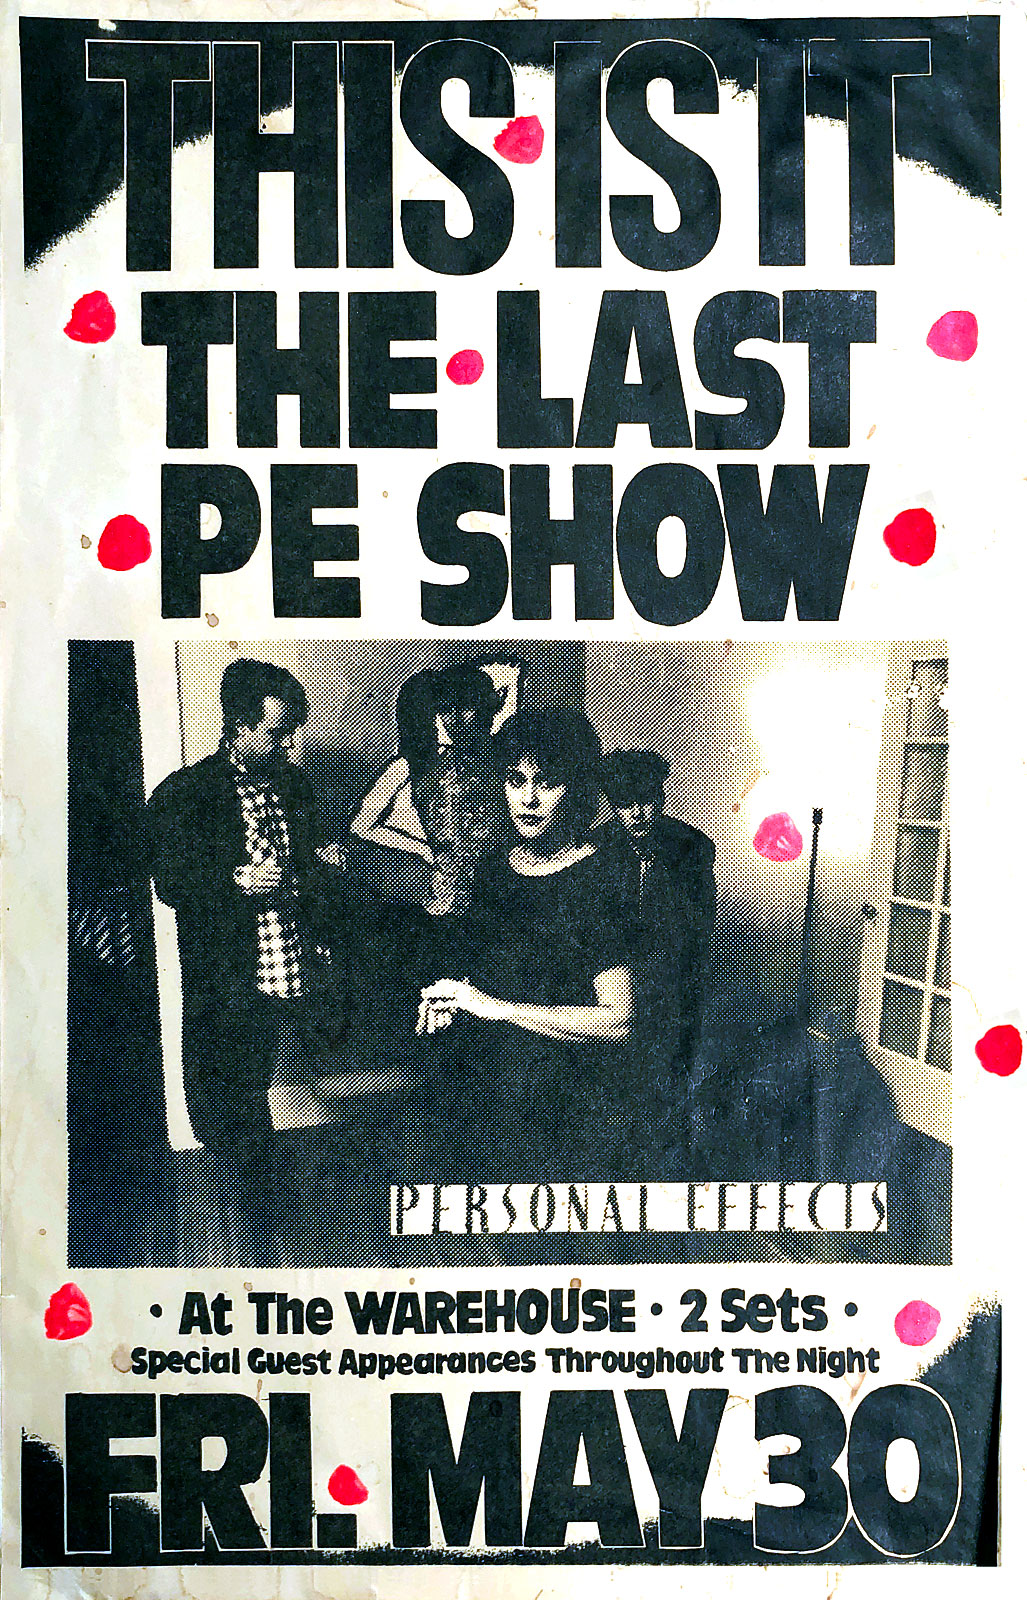 Poster for Personal Effects with Virgin Headset at The Warehouse in Rochester, New York on 053086. Billed as the last Personal Effects show the band reuntited to play the Planetarium gigs in 1987 and also played a few reunion shows.